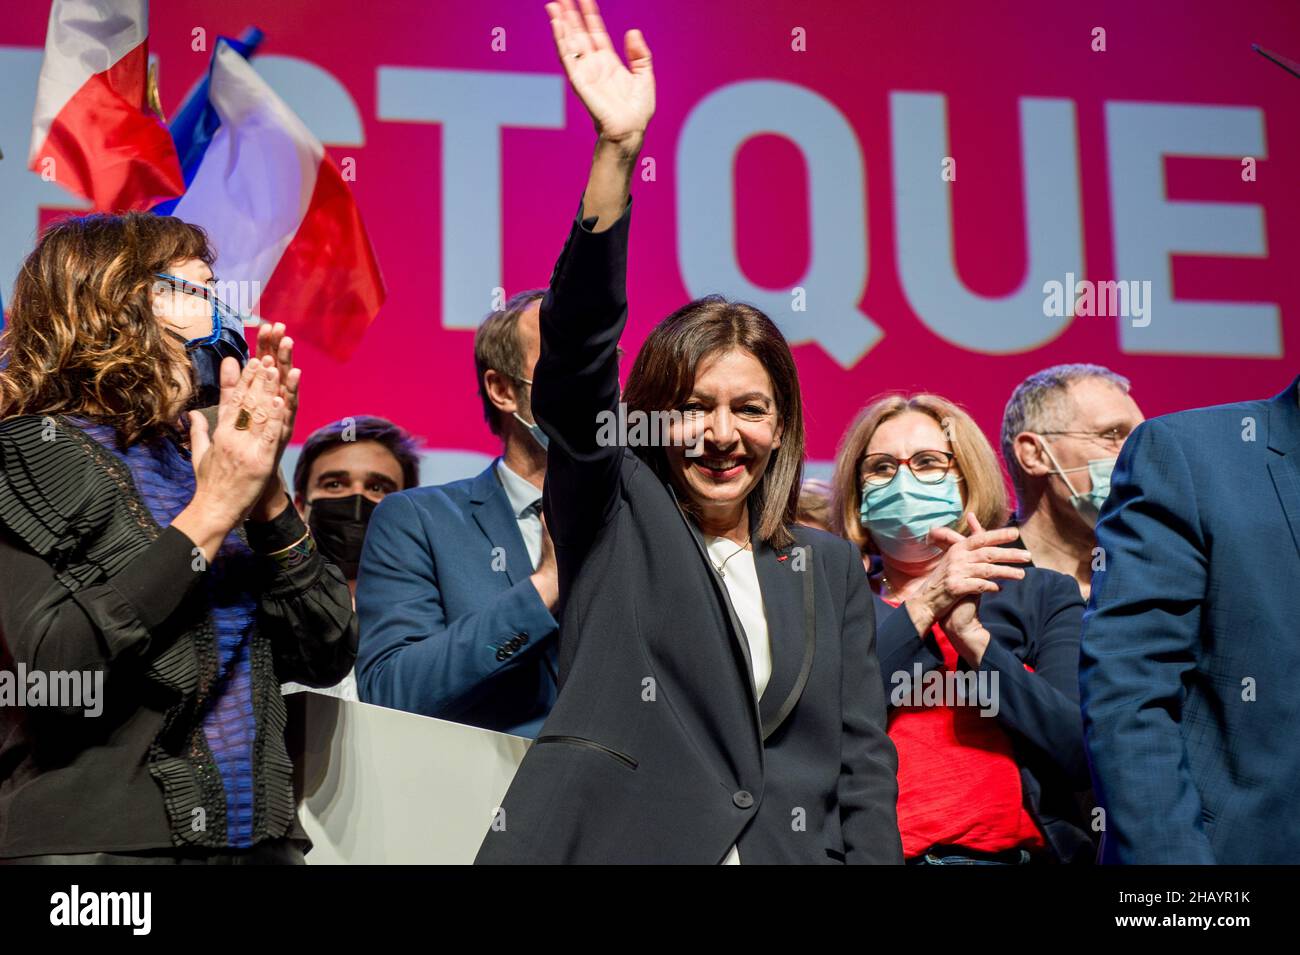 Anne Hidalgo waves to the audience during a meeting in Perpignan. The first meeting of Anne Hidalgo, representative of the socialist party to the French presidential election of 2022 has gathered barely more than 1000 people. Her score estimated at 3% by the last polls poses a problem of financing the electoral campaign. It will be necessary to reach at least a score of 5% in the first round to obtain a refunding of the expenses of campaign by the state. At the meeting in Perpignan, the militants only gave 580 Euros to the campaign financing account. (Photo by Laurent Coust/SOPA Images/Sipa Stock Photo